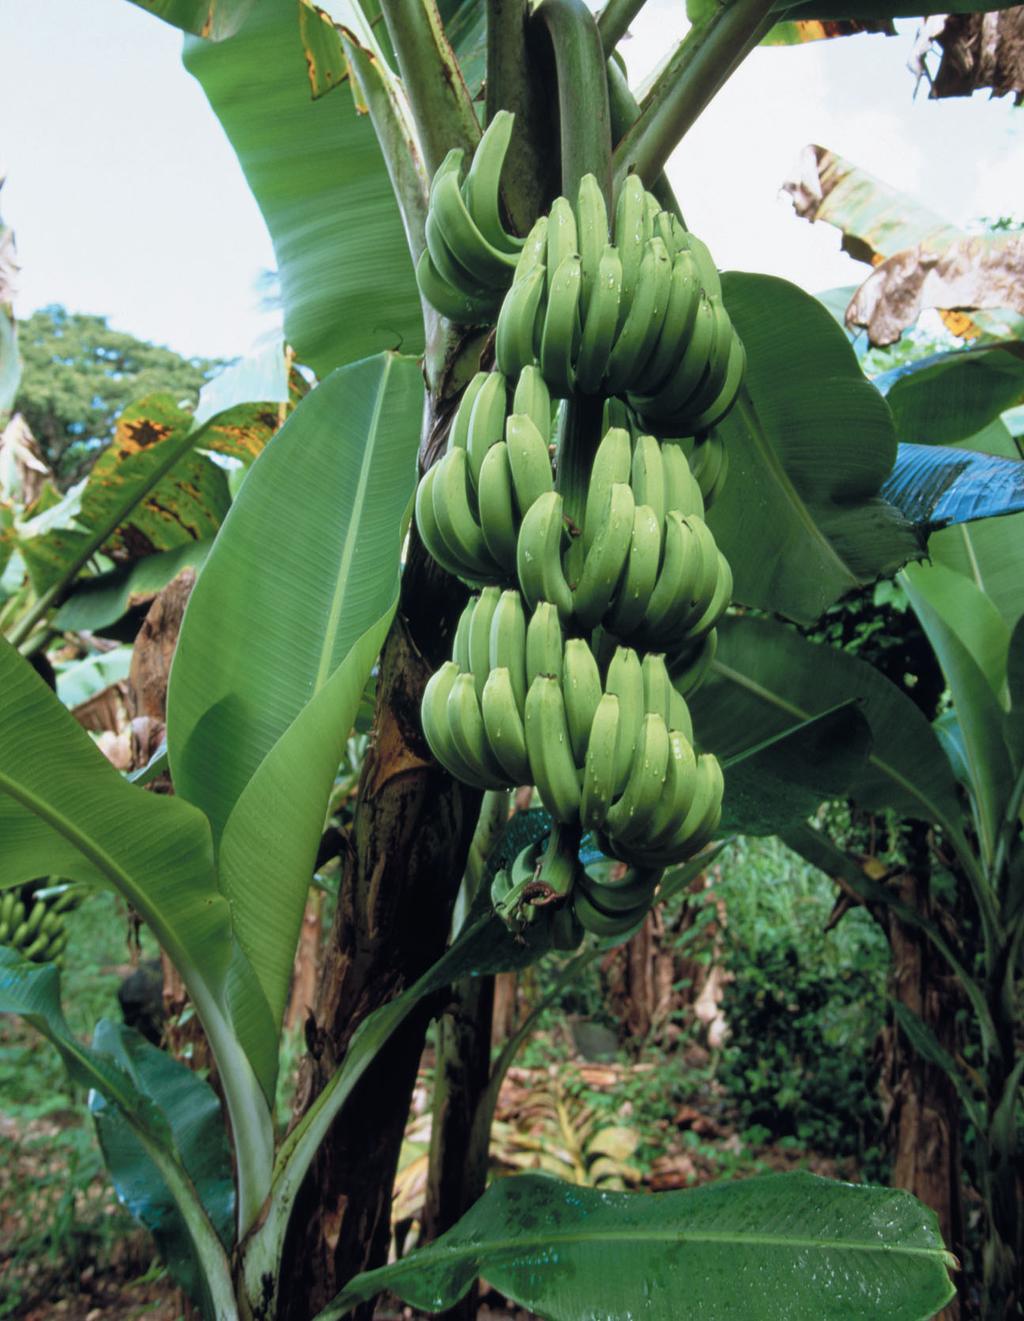 SEARCH LIGHT Plantains are a) bananas that aren t